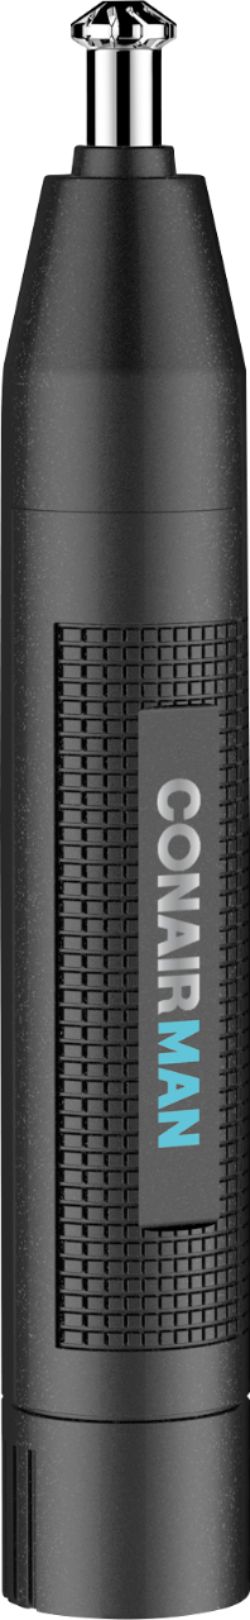 Angle View: Conair - ConairMan Battery Operated Ear/Nose Trimmer - Black